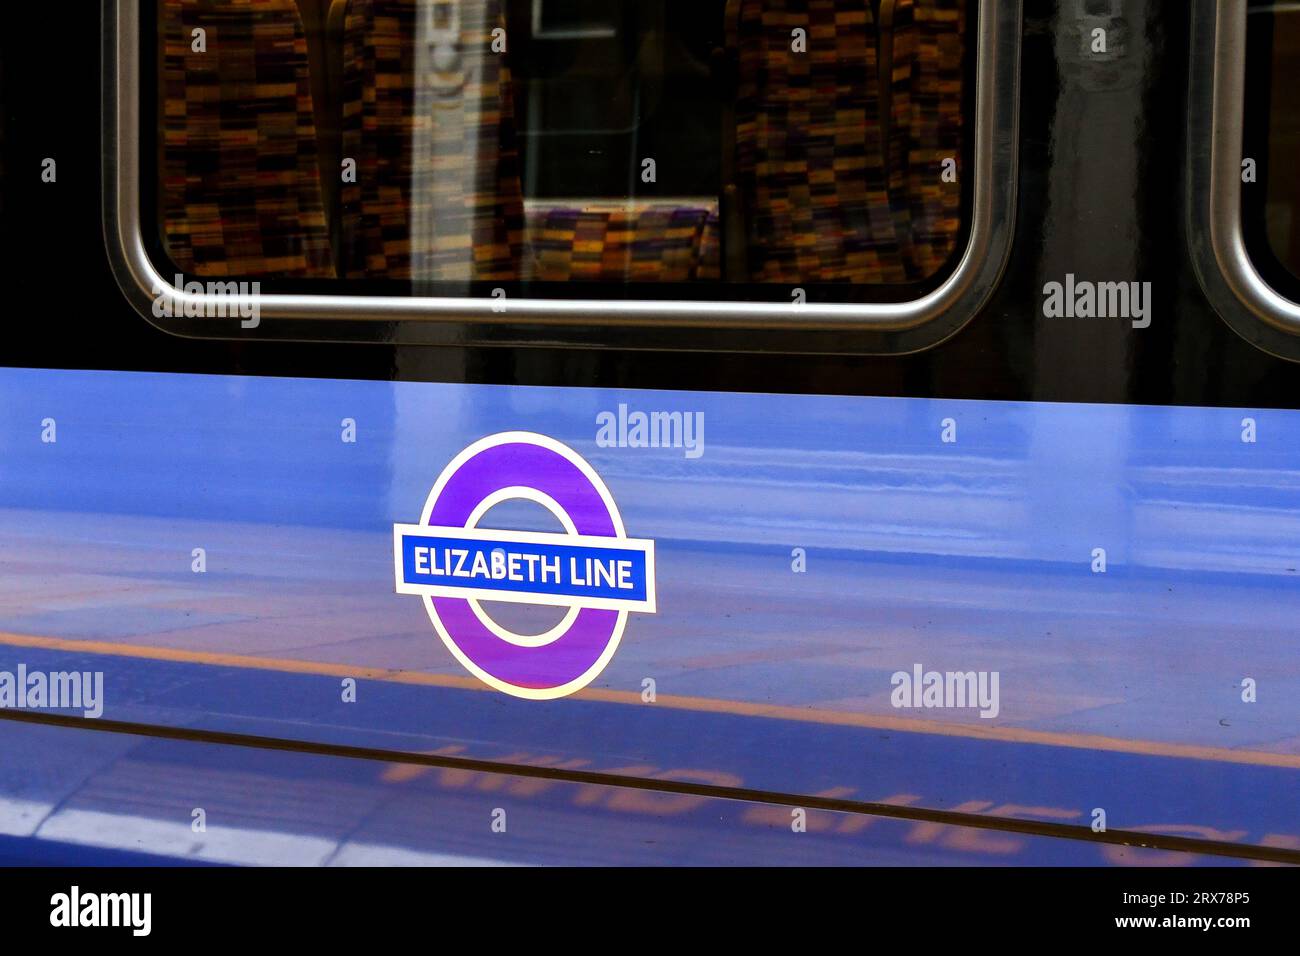 London, Enbgland, UK - 27 June 2023: Close up view of the side of a train on the new Elizabeth Line at London Paddington railway station. Stock Photo